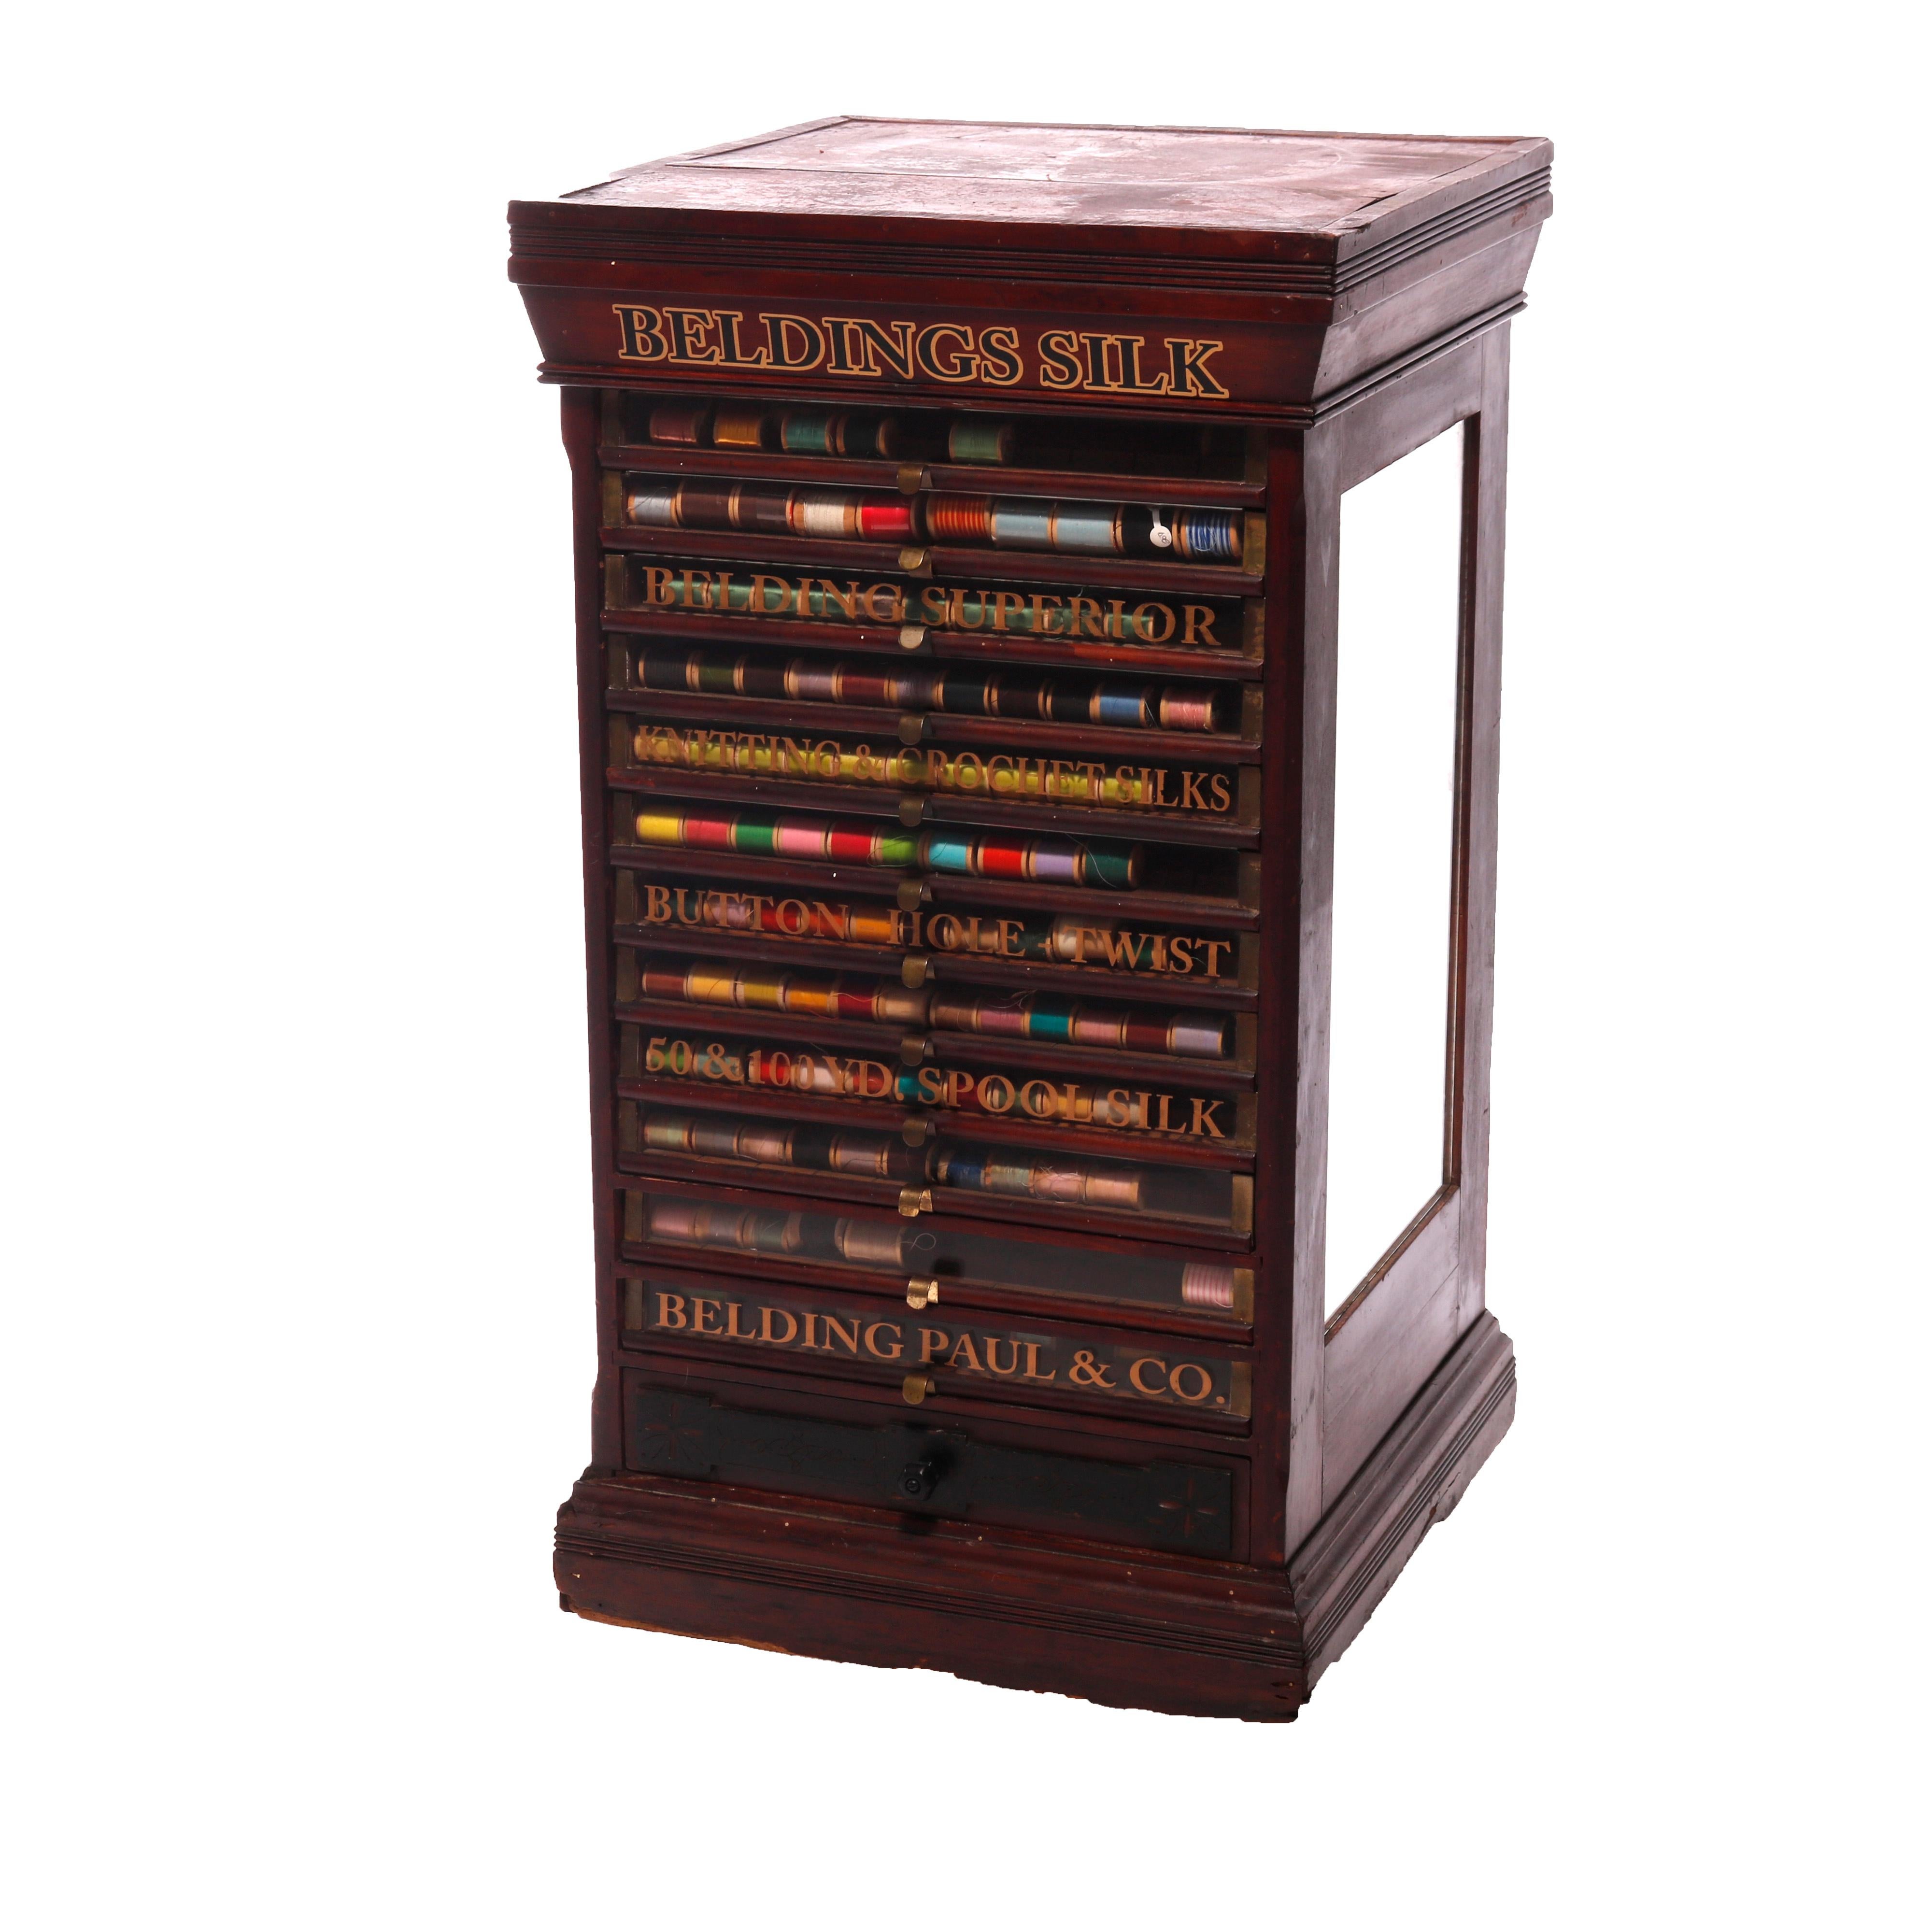 An antique Beldings Silk country store advertising spool cabinet offers thirteen glass front pull-out shelves (drawers), some with gilt lettering, case with mirrored sides, thread collection included, c1890

Measures - 35''H x 19''W x 19.5''D.